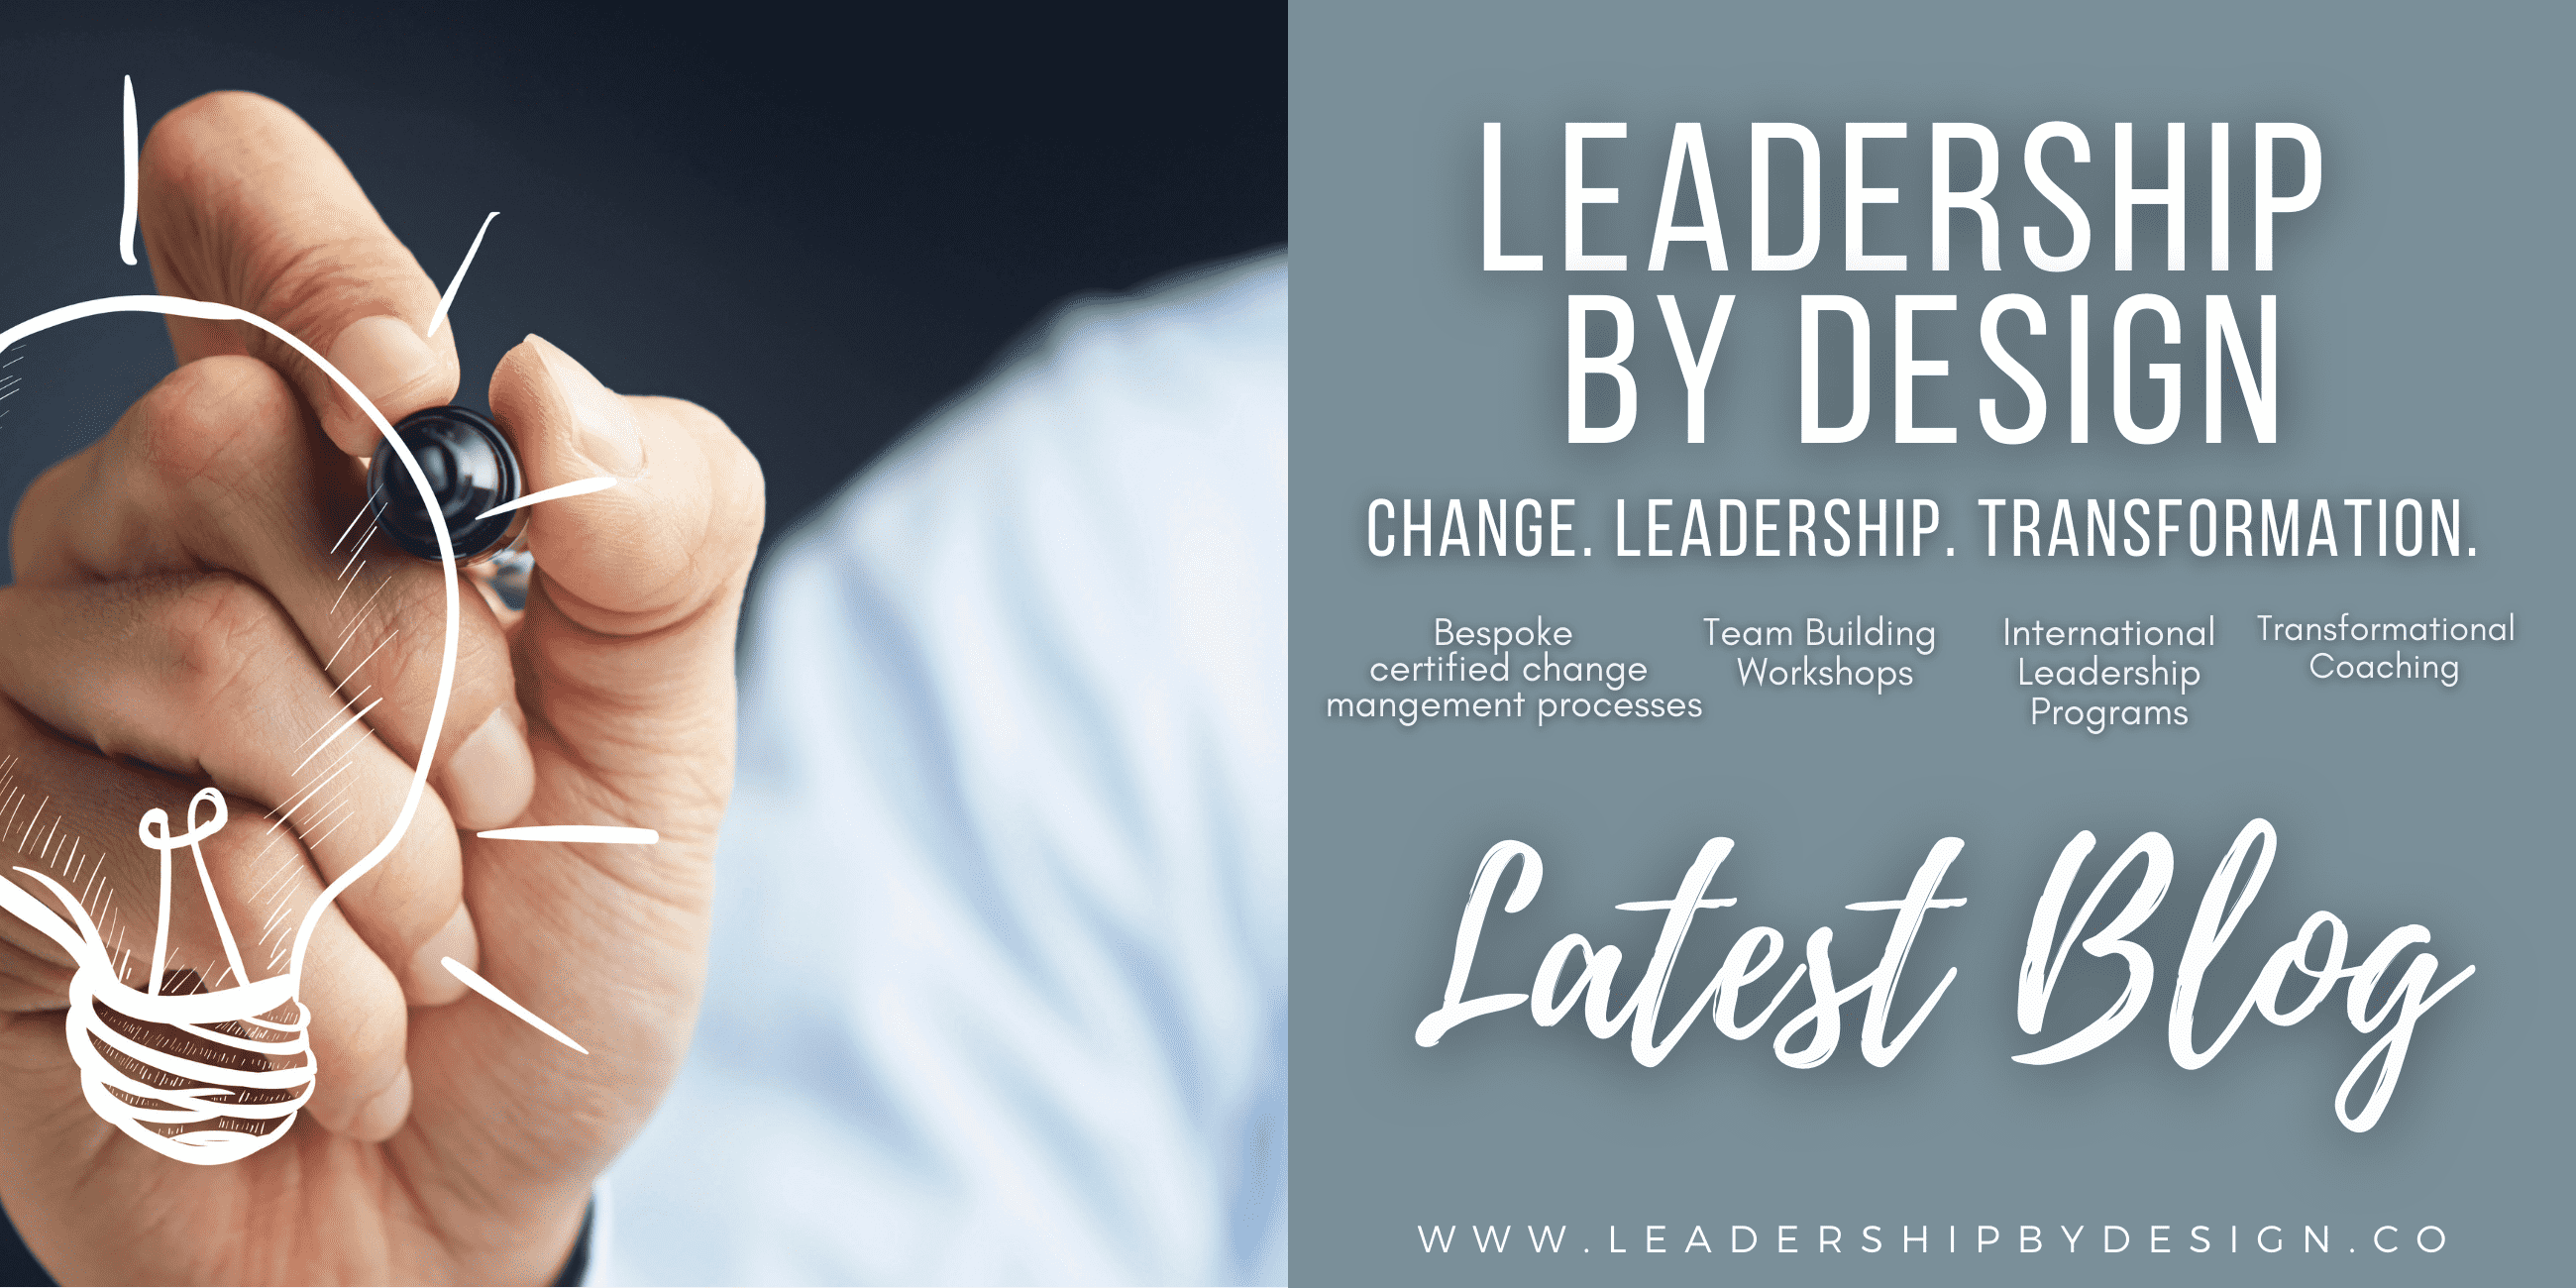 How good are your leadership skills?